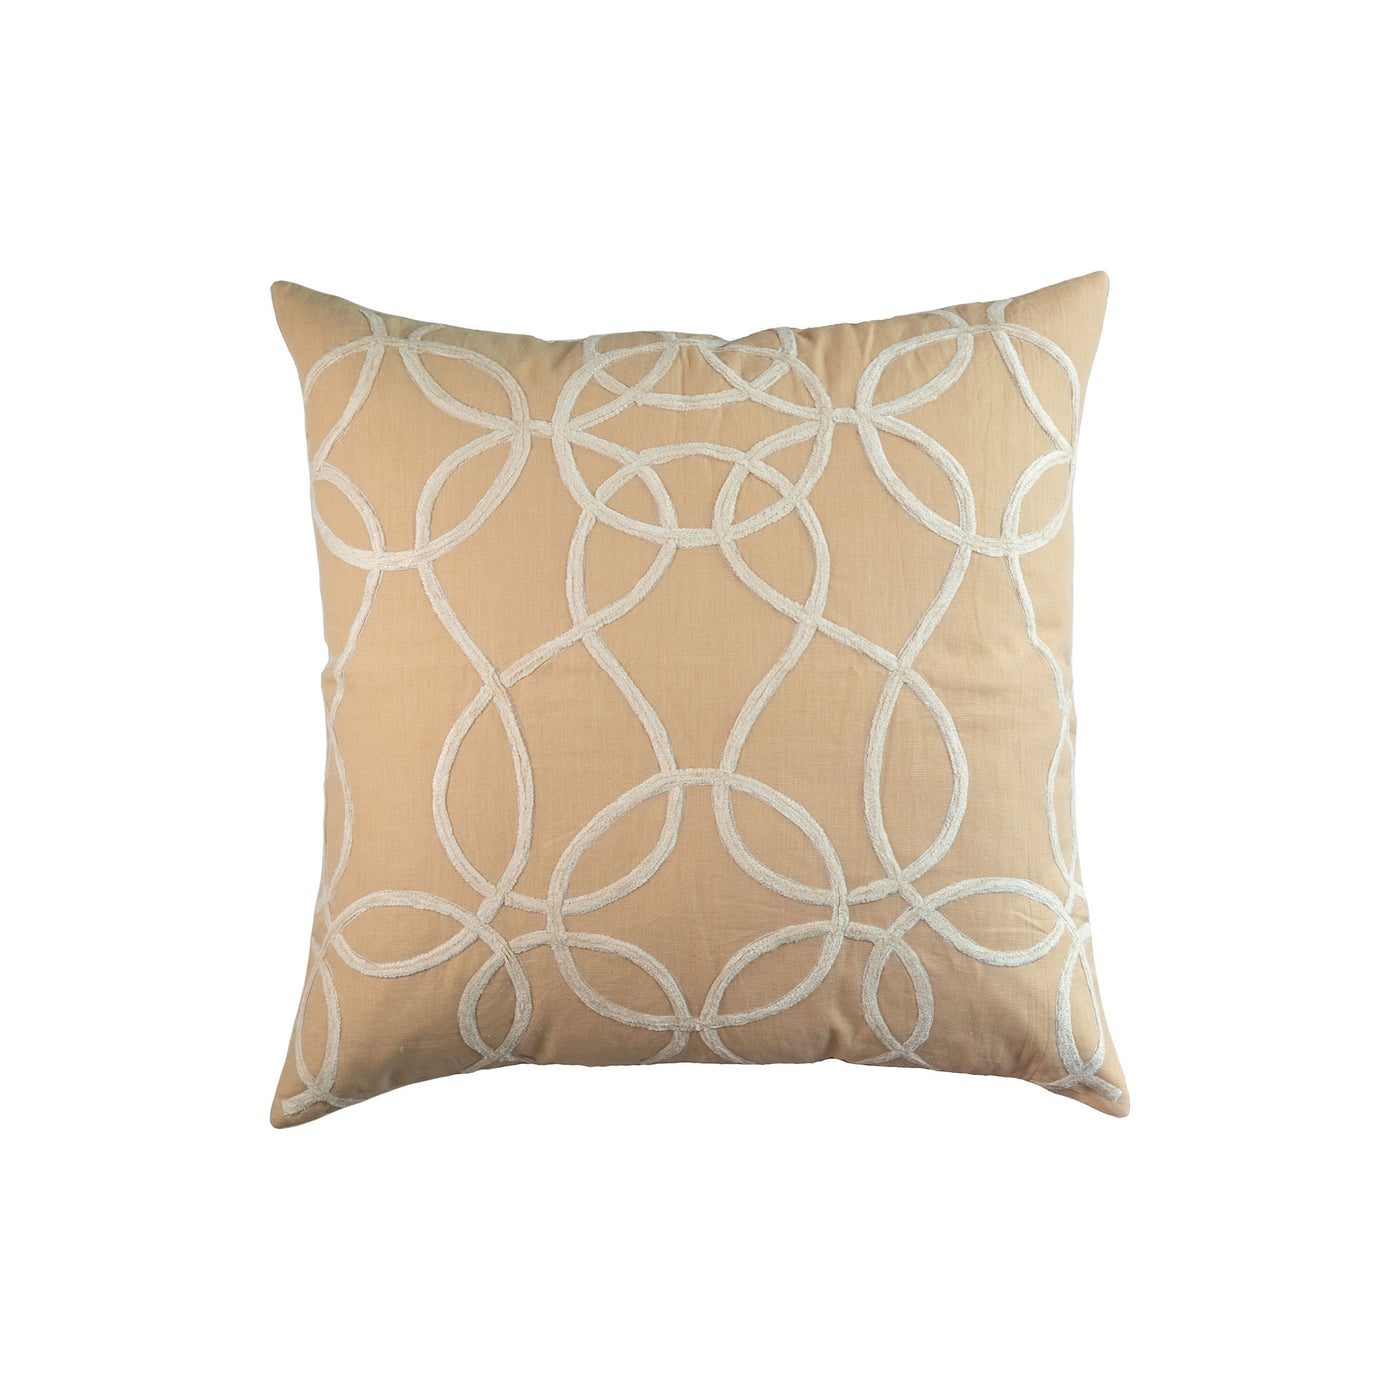 Whimsical Euro Pillow Straw Ivory 28x28 (FINAL SALE)